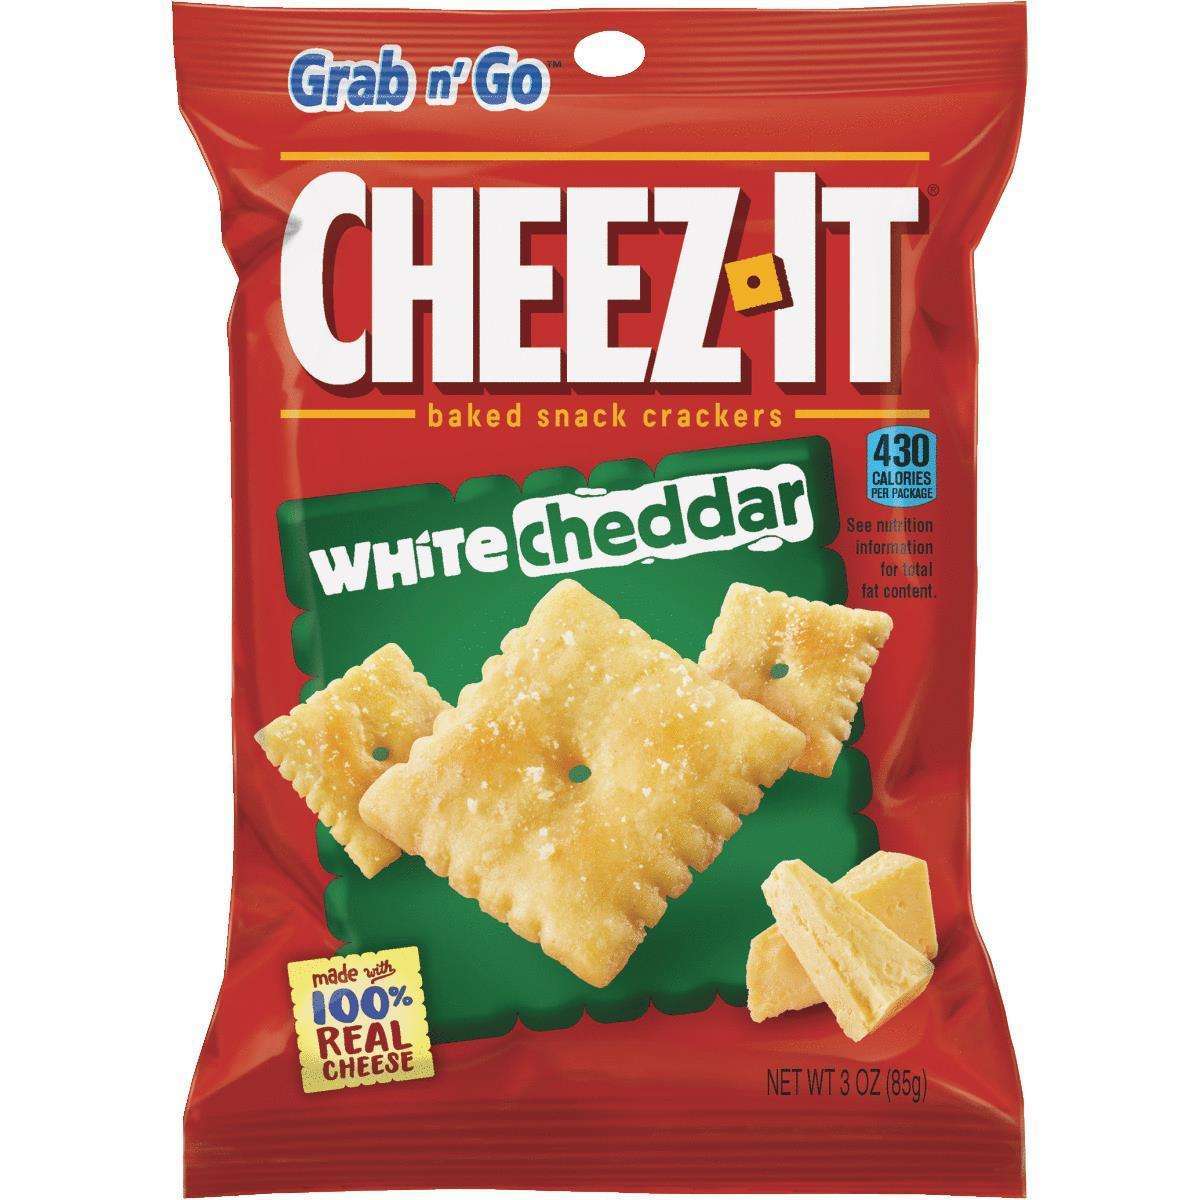 Cheez-It White Cheddar Baked Snack Crackers 3oz. (85g)